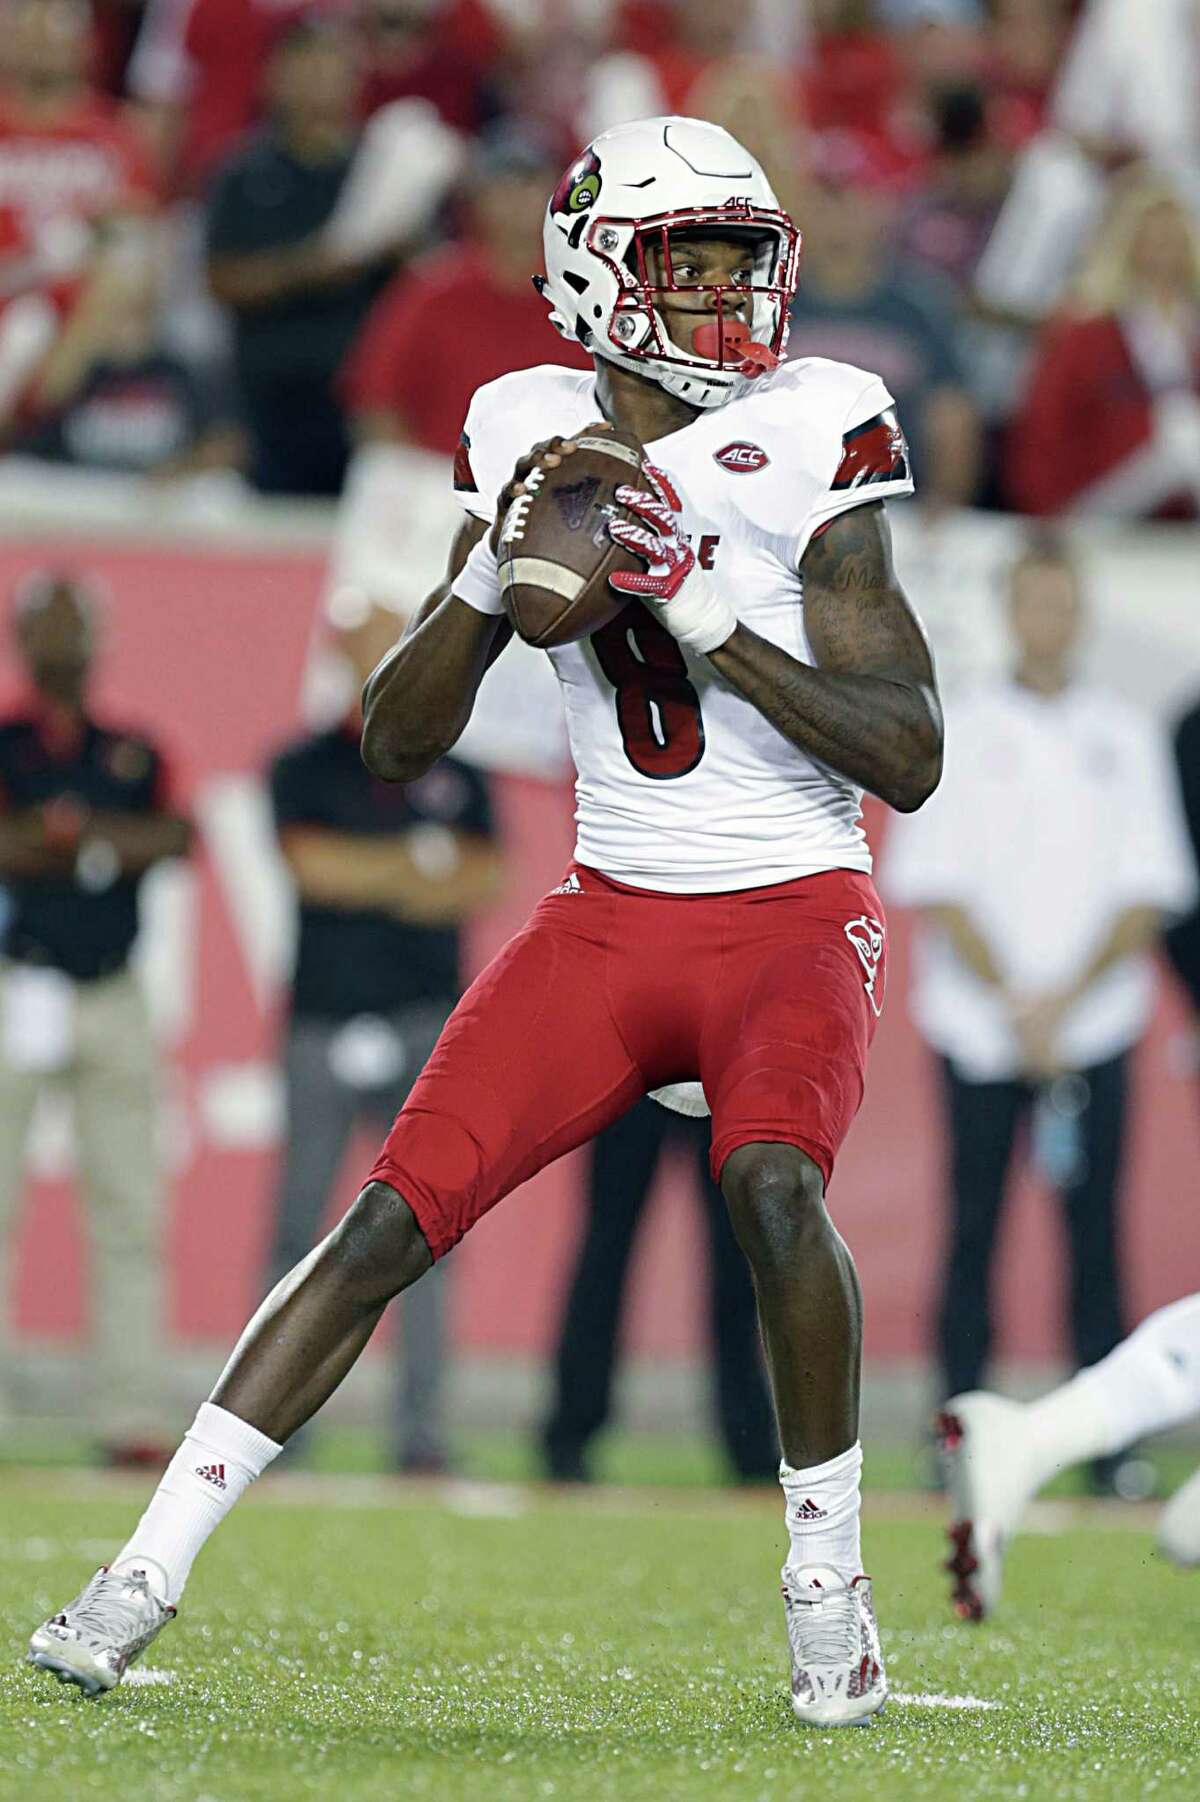 UH smothers Lamar Jackson in demolition of No. 5 Louisville